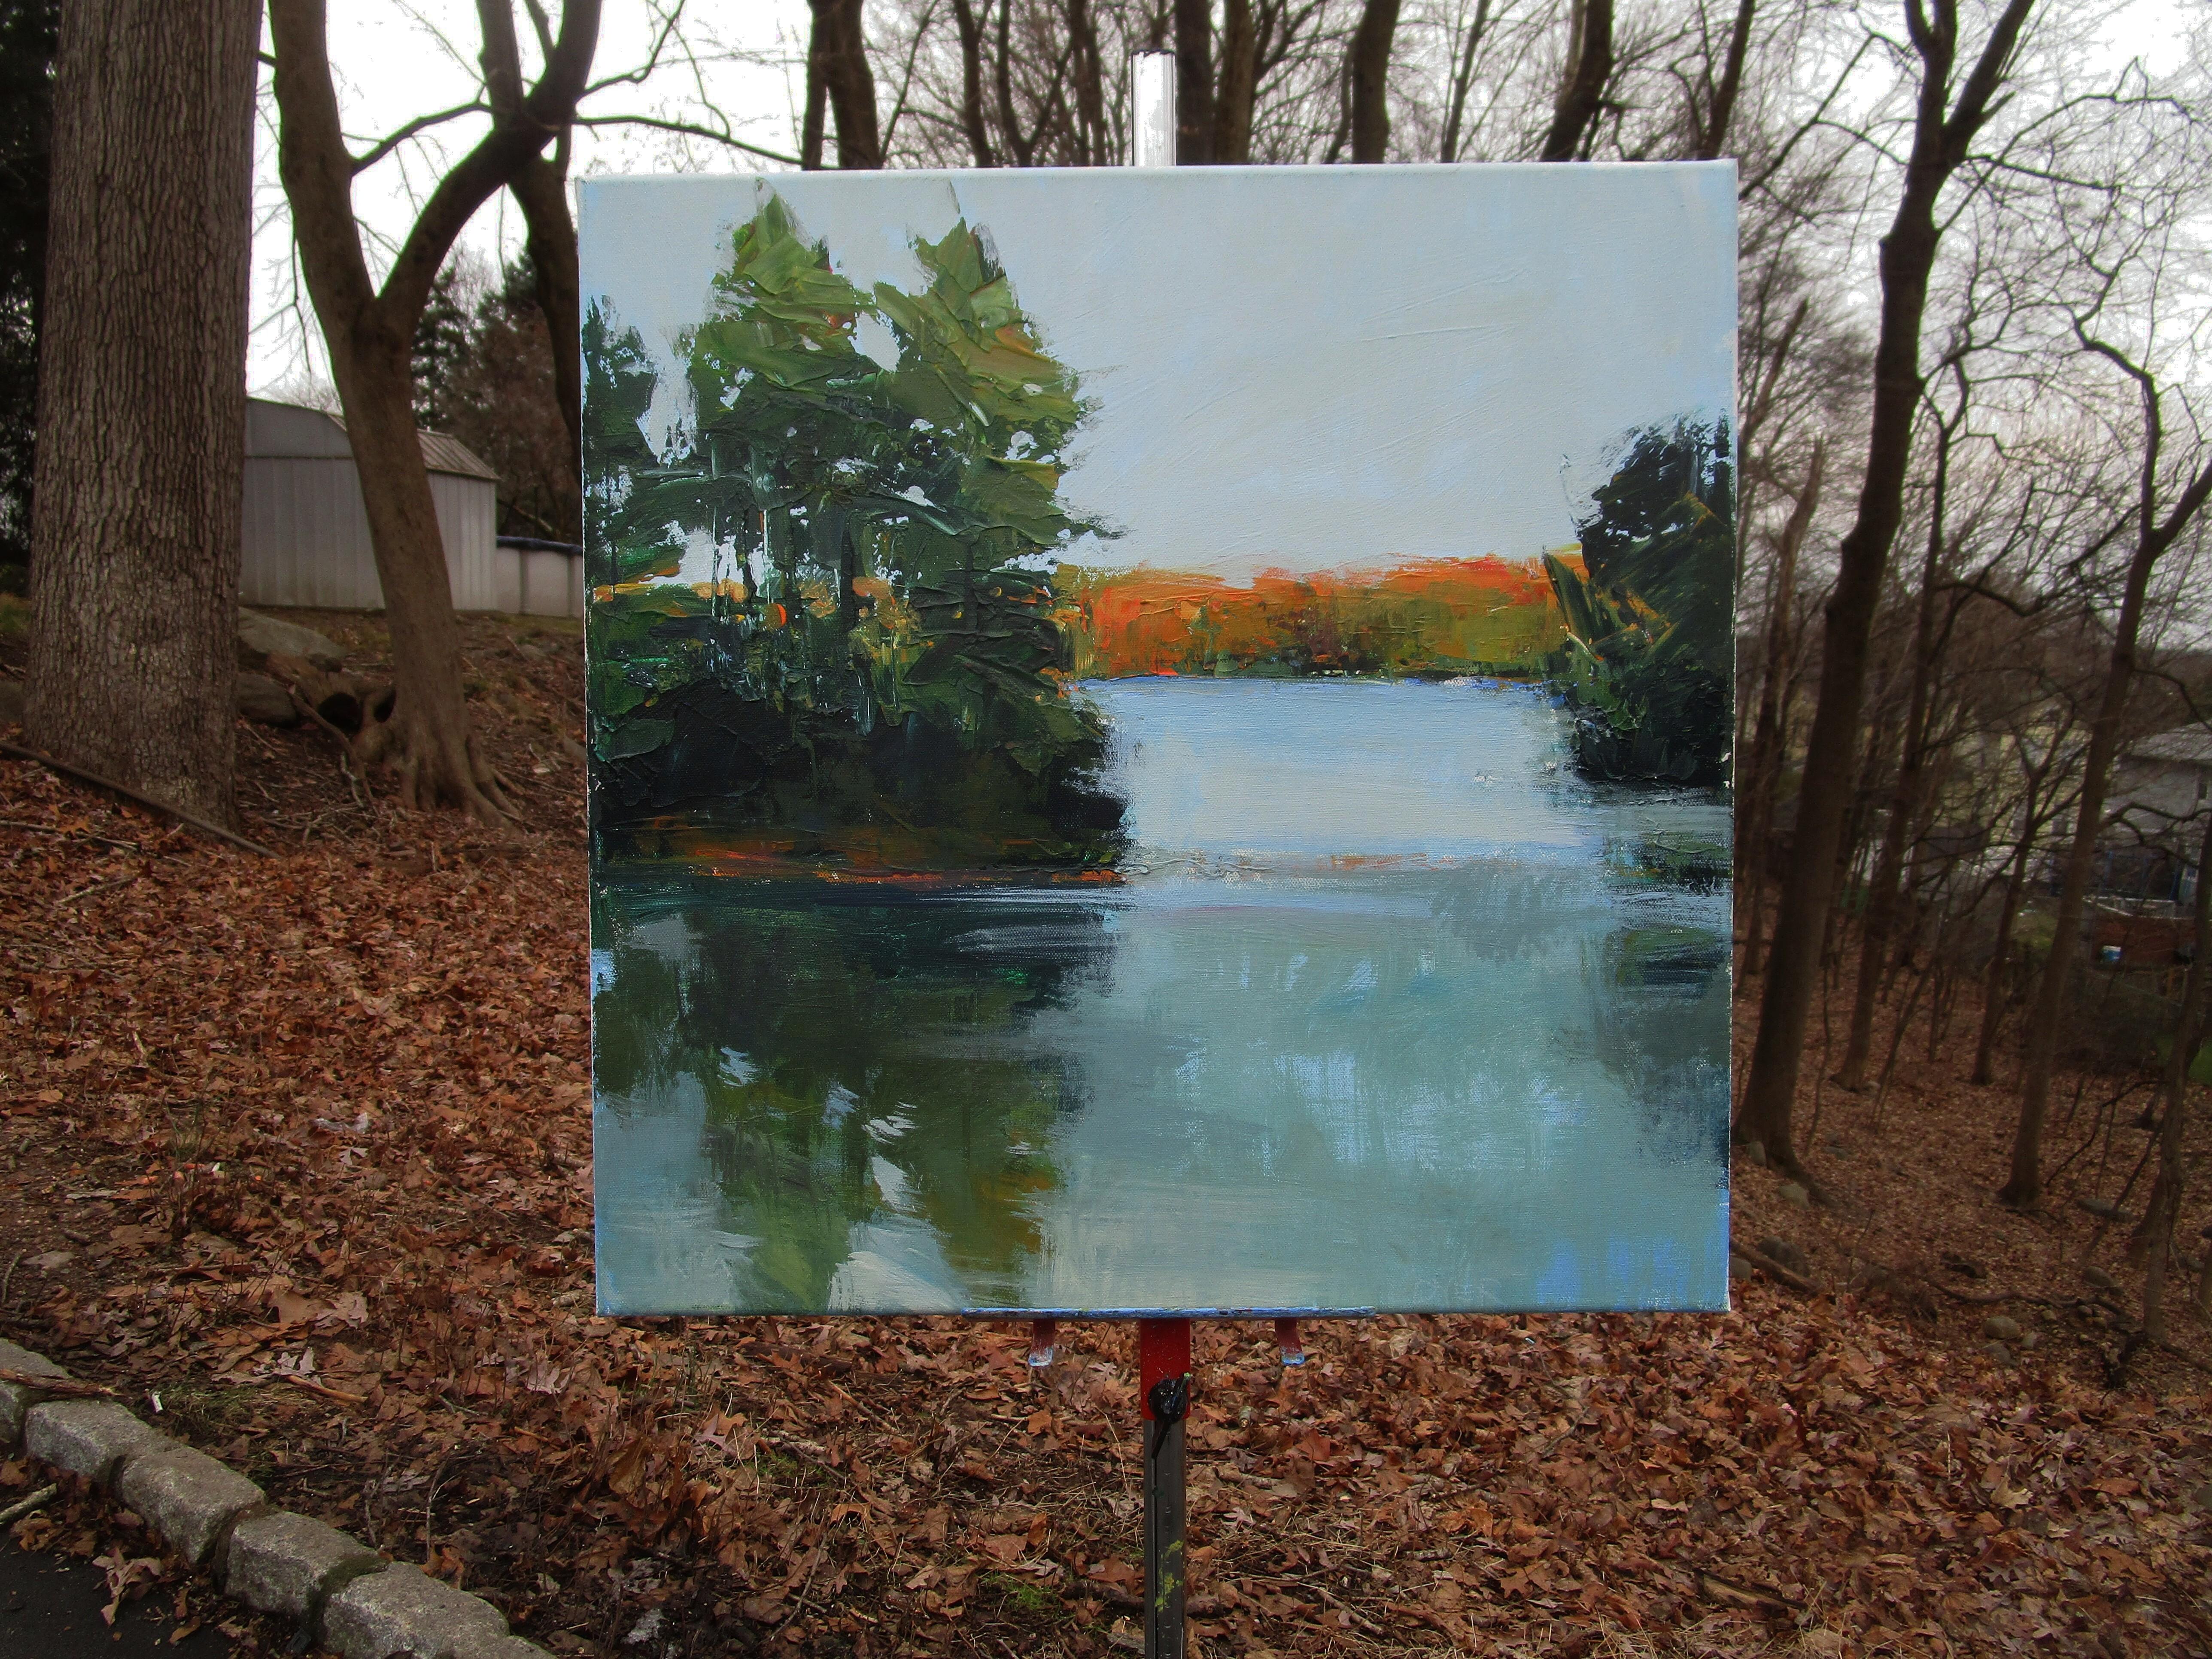 <p>Artist Comments<br>Artist Janet Dyer depicts a lake at sunset in a state park near her home. The tranquil water mirrors its surroundings, while the distant tree line remains bathed in the last rays of sunlight, intensifying the autumn hues of the